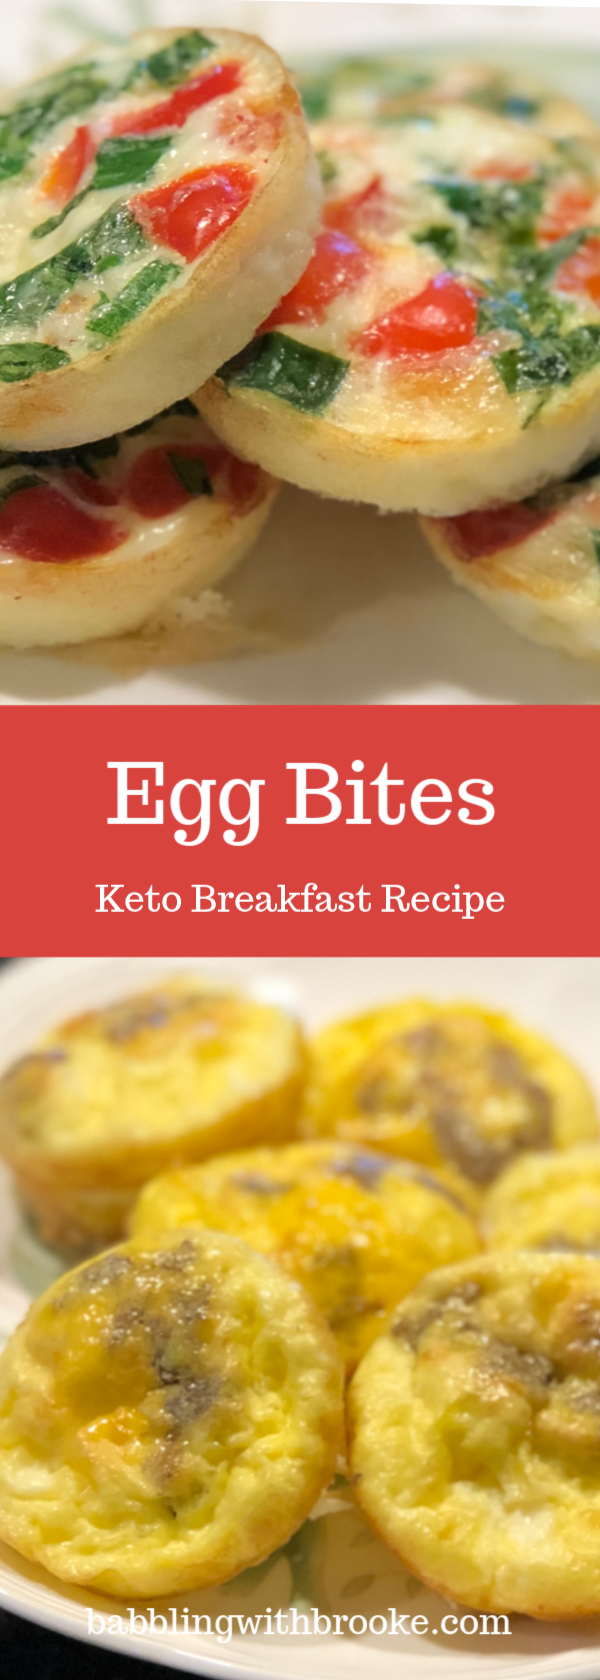 These are delicious and easy keto breakfast egg bites! Perfect for meal prepping or for adjusting to your ideal flavors. #eggbites #ketobreakfast #easyrecipes #easybreakfastrecipe #ketorecipe